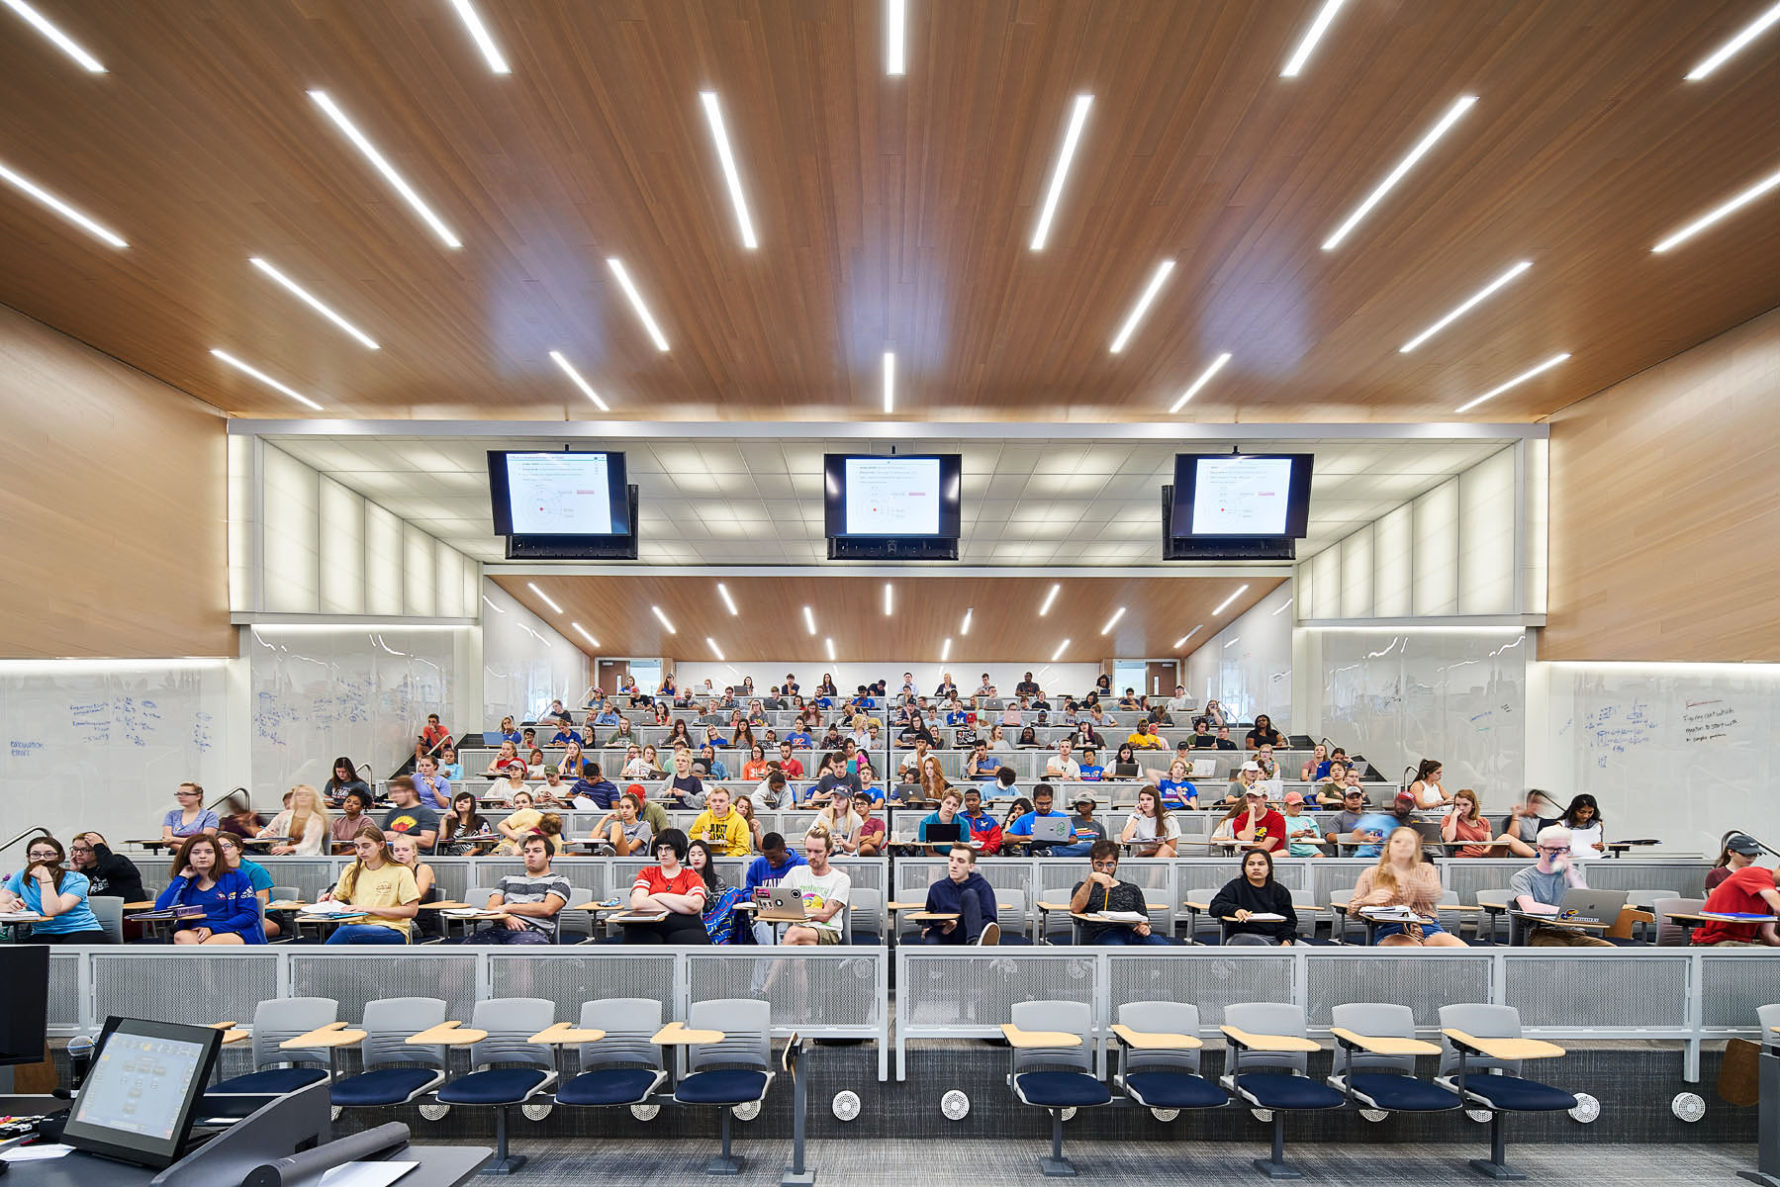 Five trends shaping campus environments